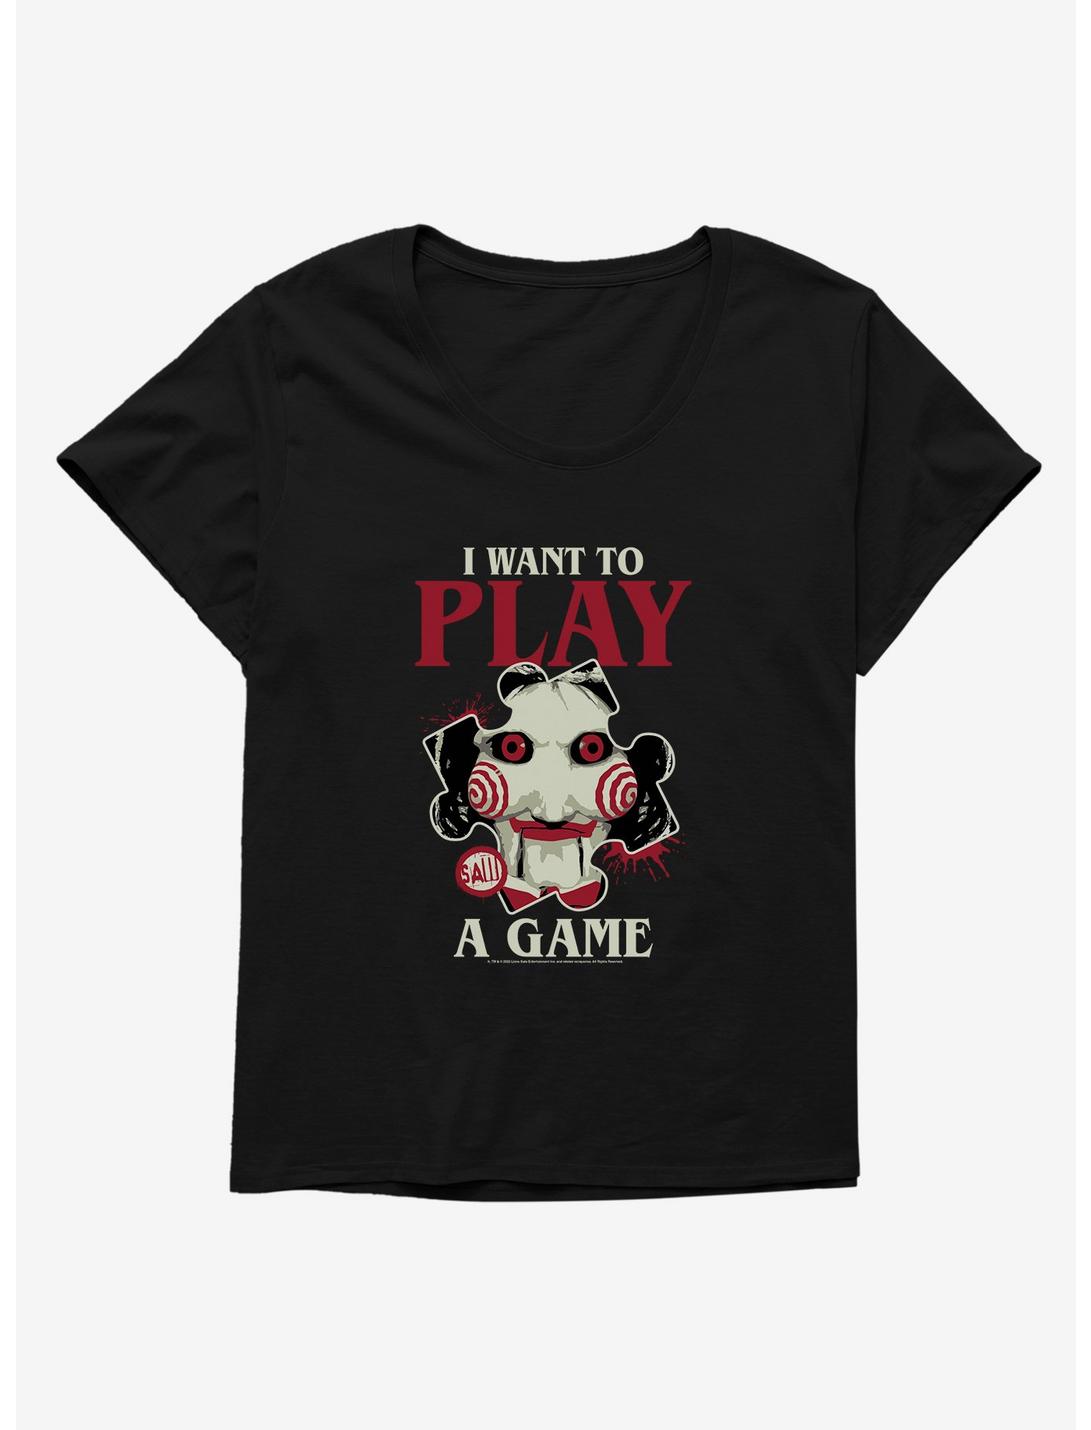 Saw I Want To Play A Game Girls T-Shirt Plus Size, BLACK, hi-res